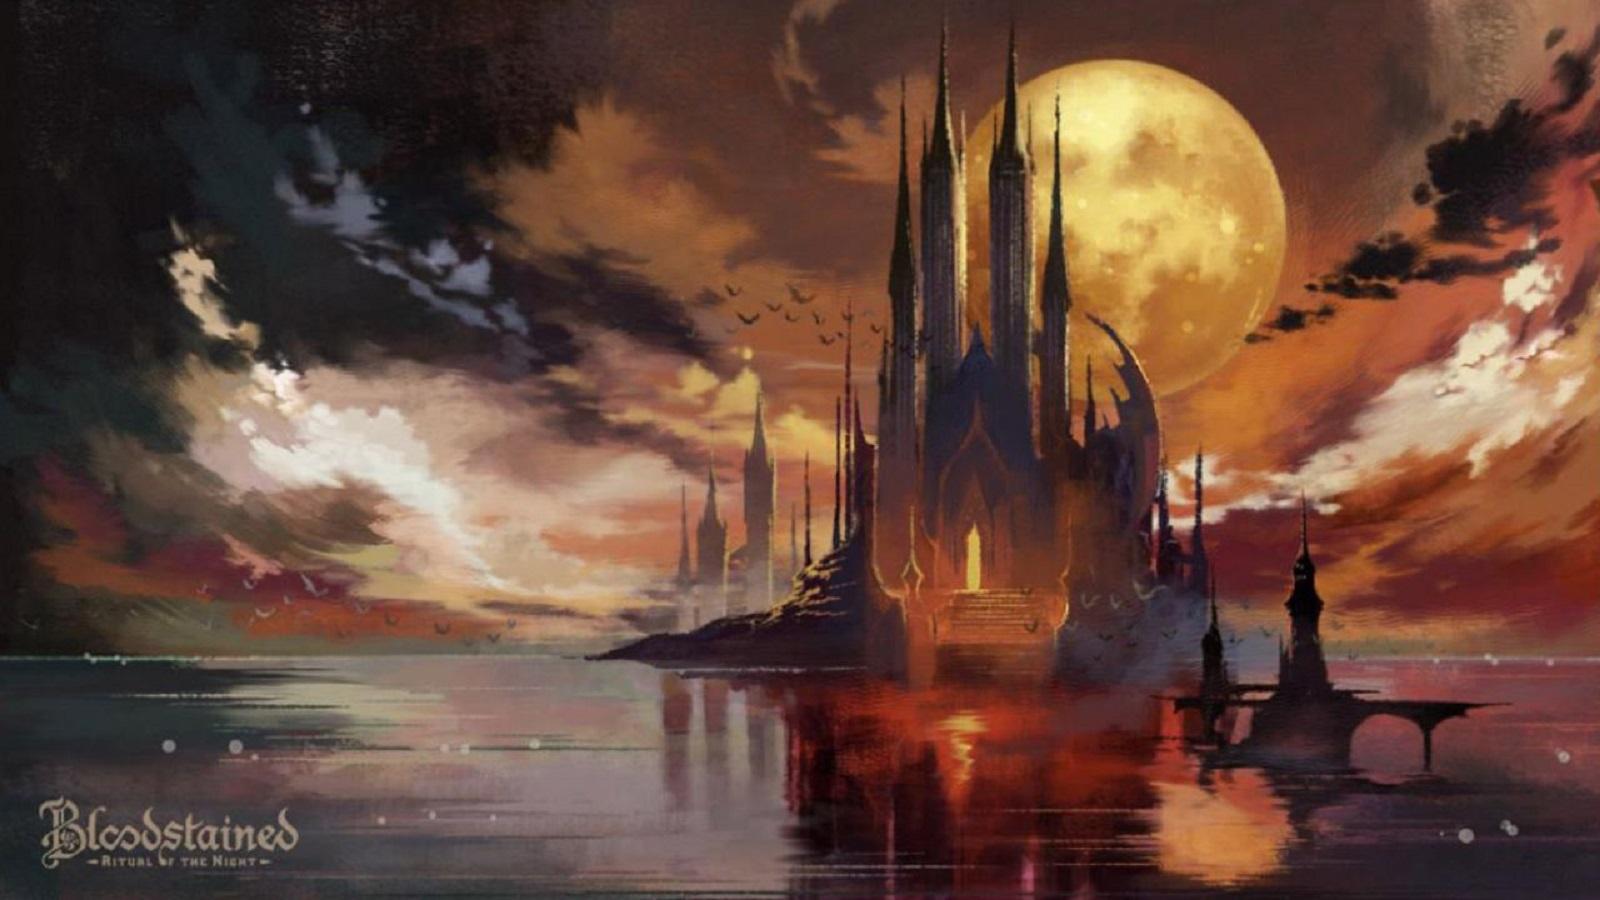 Bloodstained Ritual of the Night Announced by Castlevania Creator